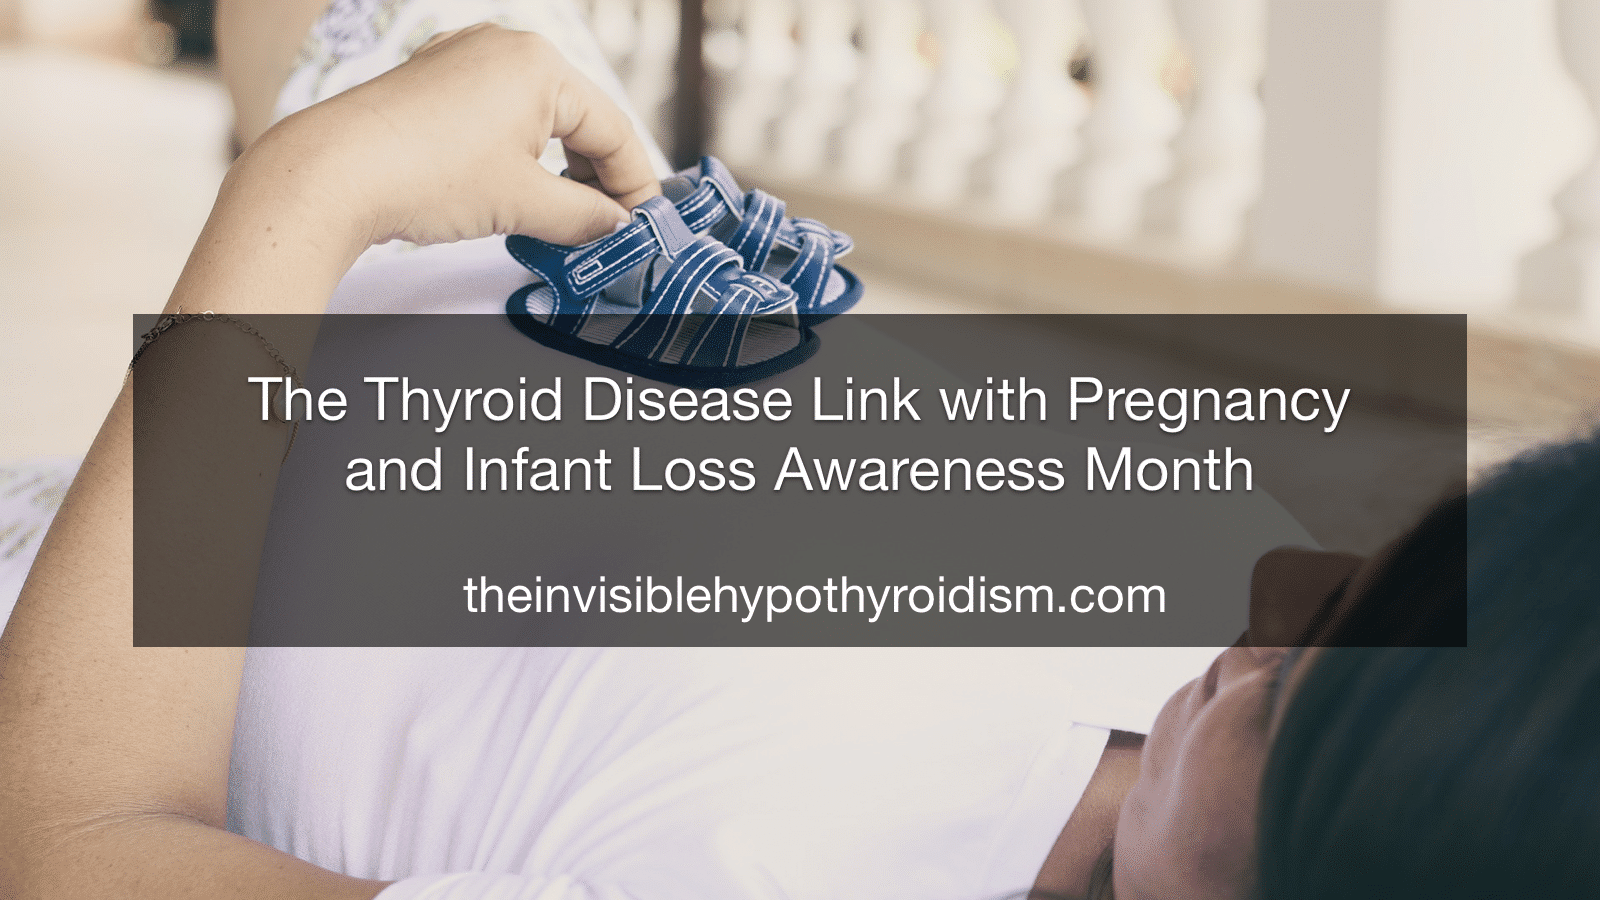 The Thyroid Disease Link with Pregnancy and Infant Loss Awareness Month